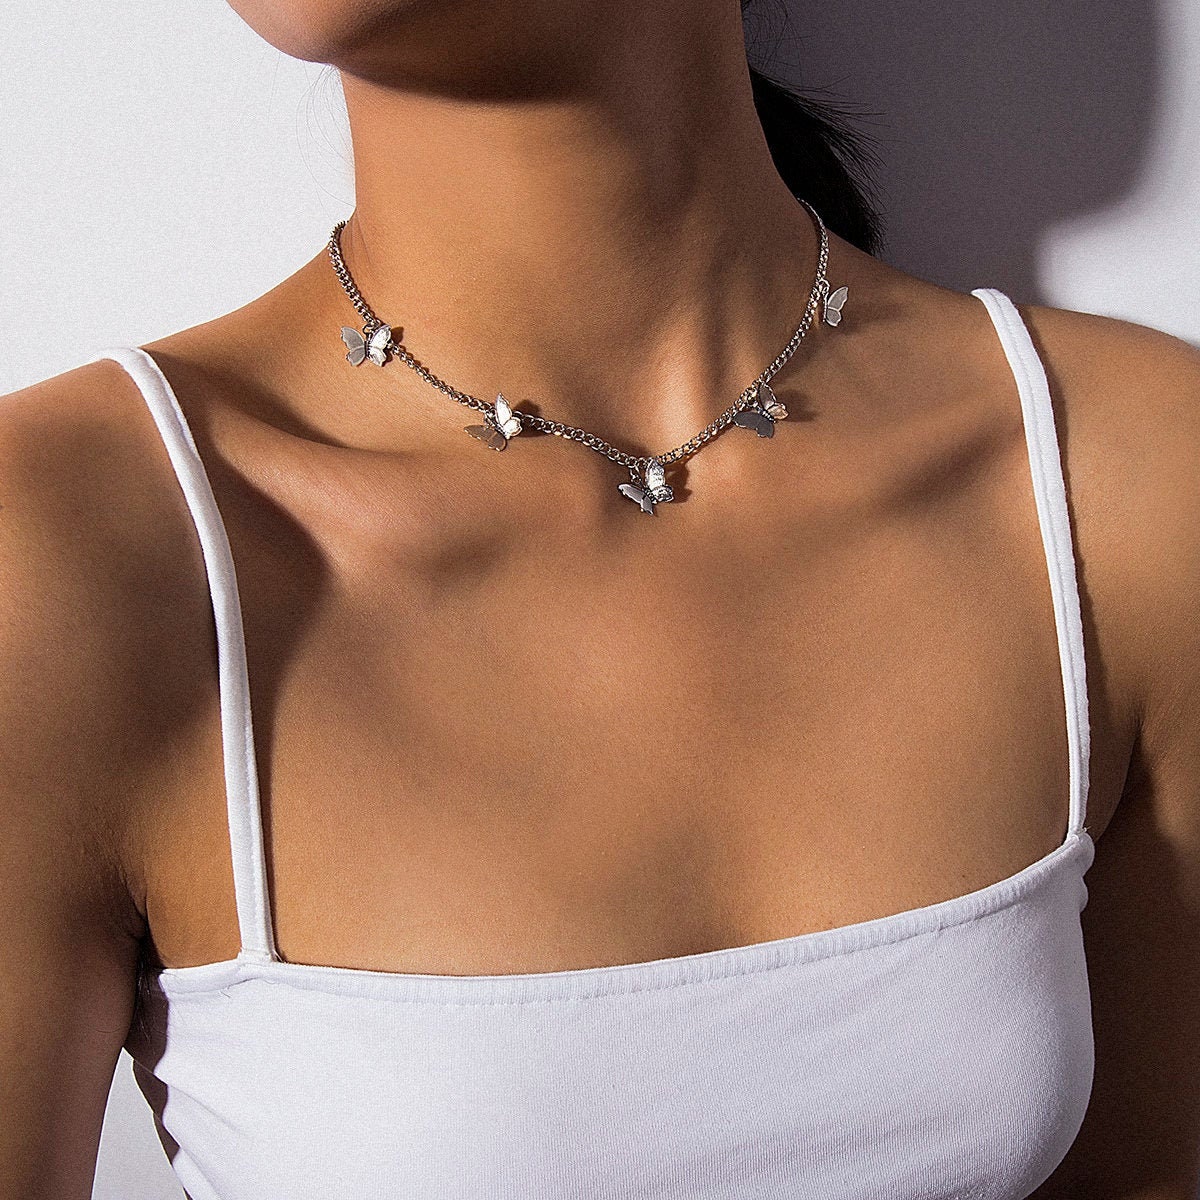 Sterling Silver Chain Gift Under 40 Dainty Choker Modern Gift For Her Butterfly Pendant Necklace Minimalist Jewelry